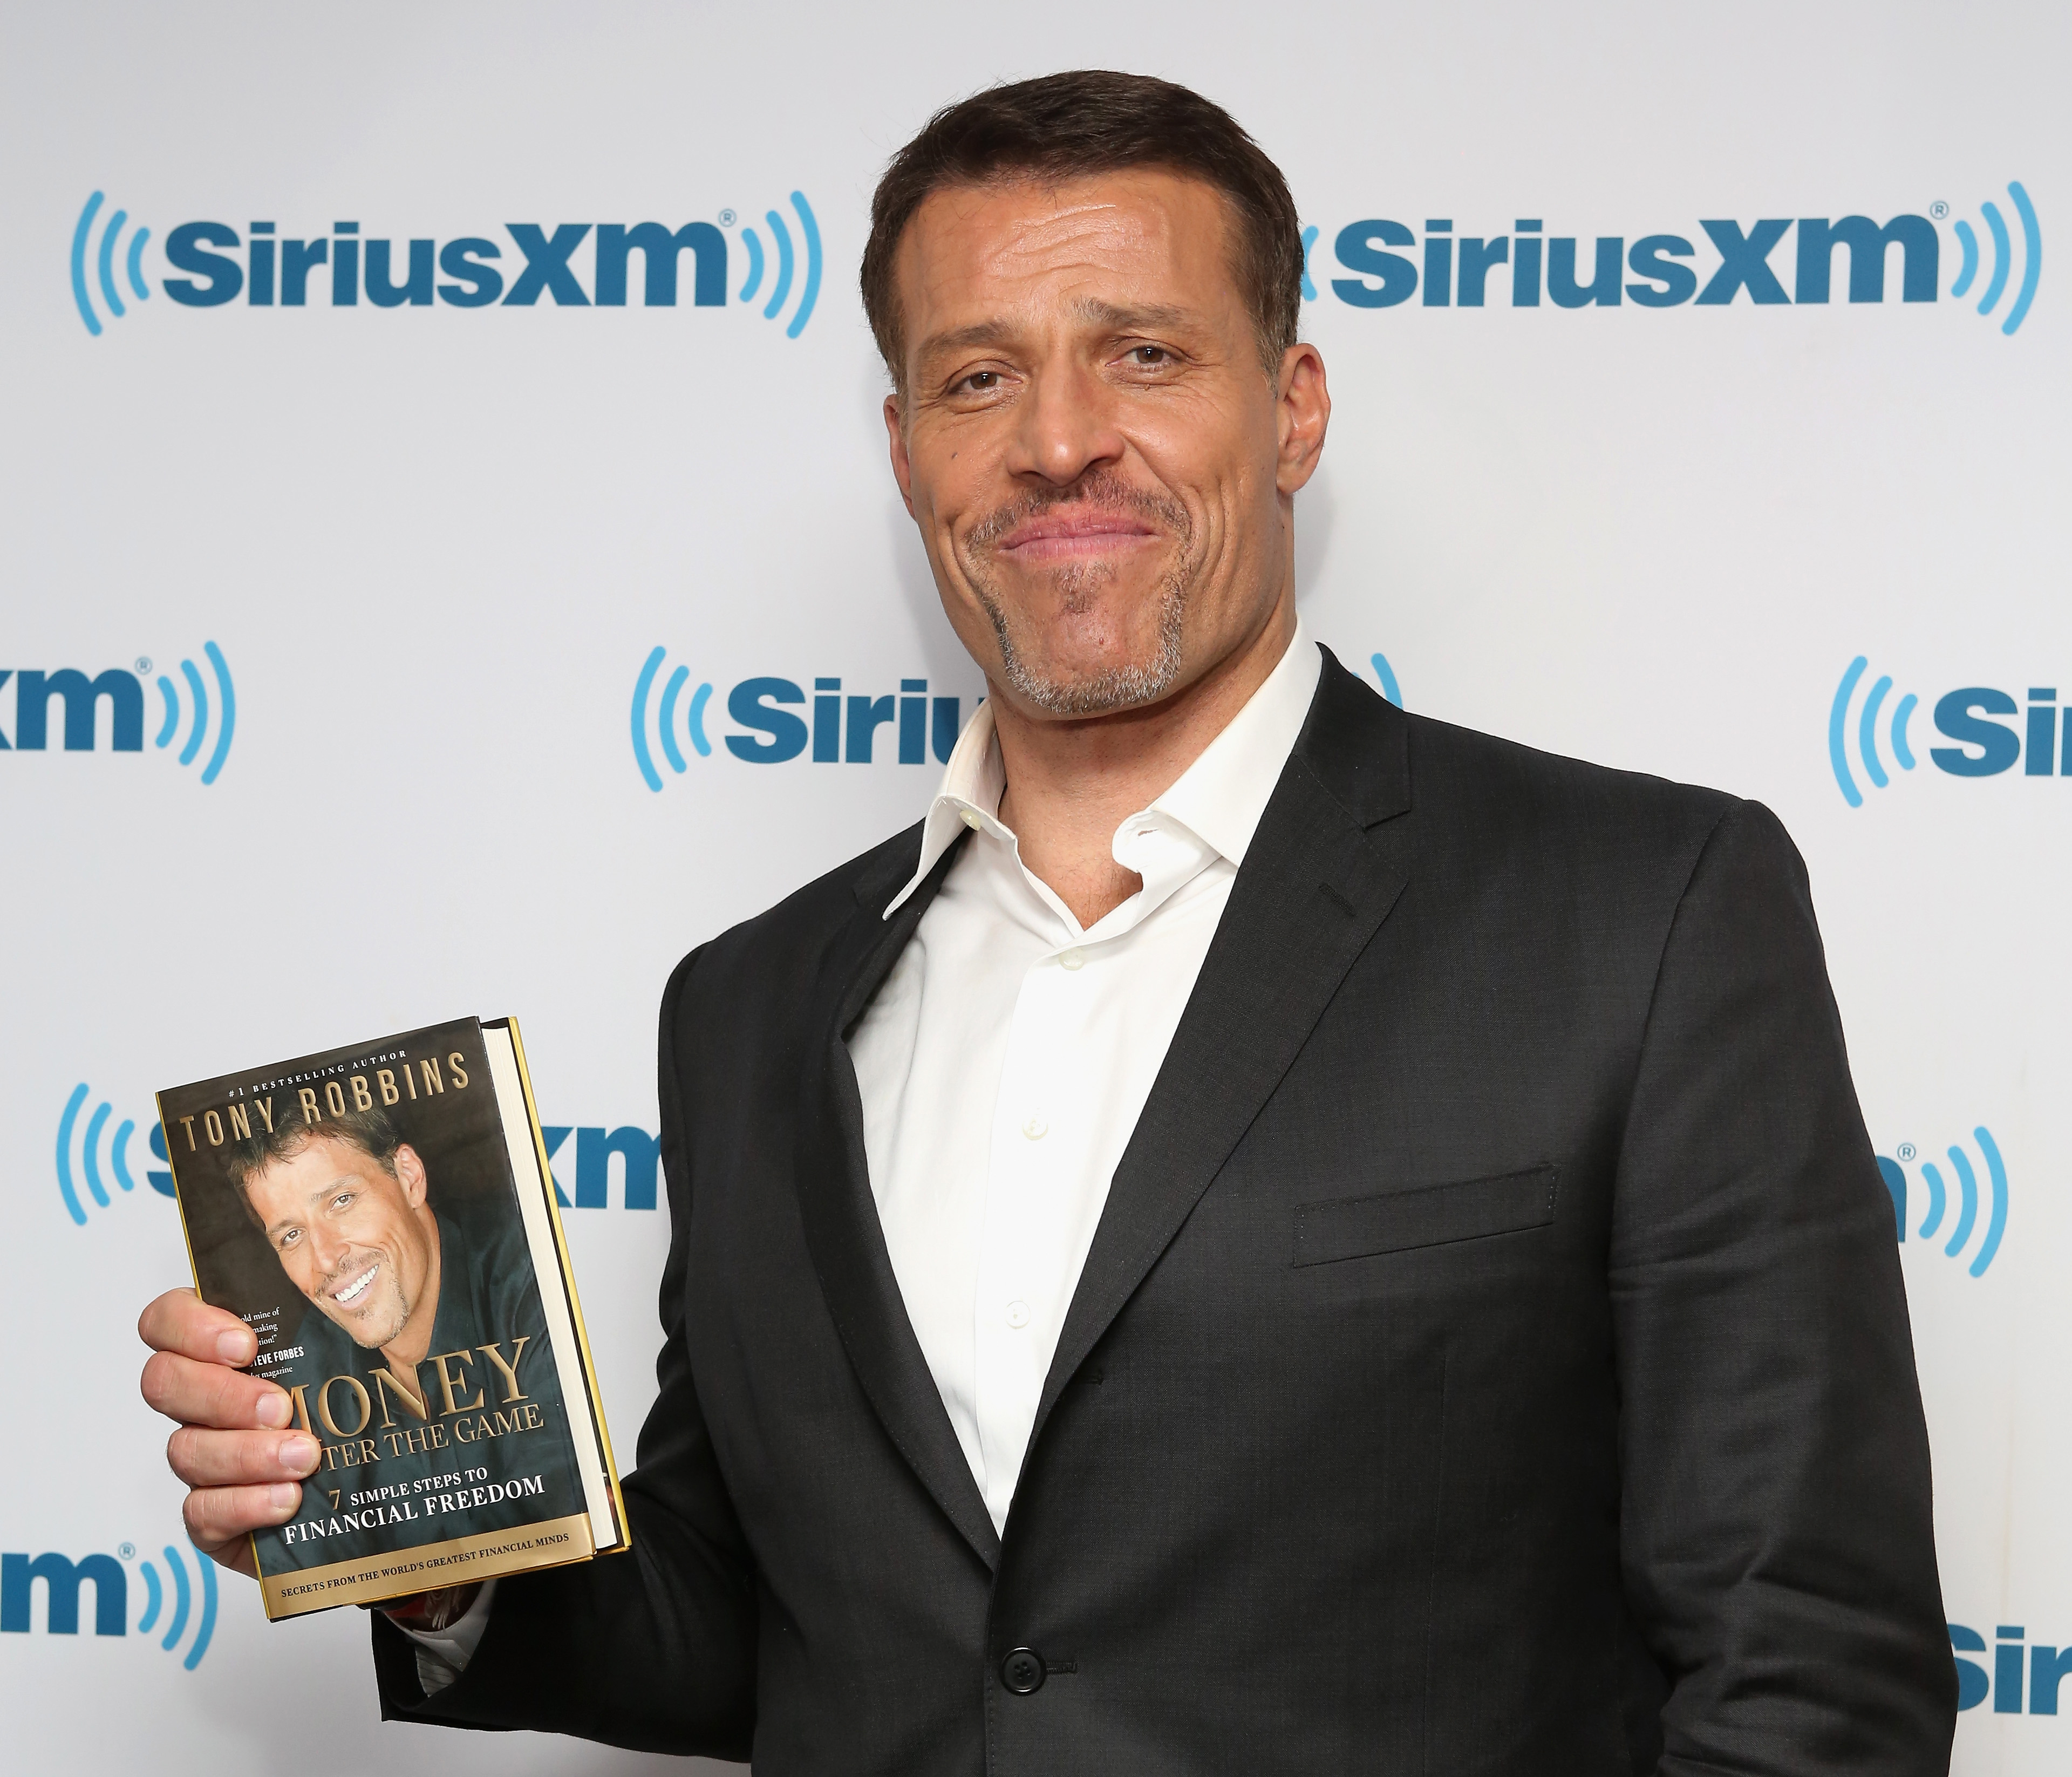 tony robbins the ultimate business mastery system amazon